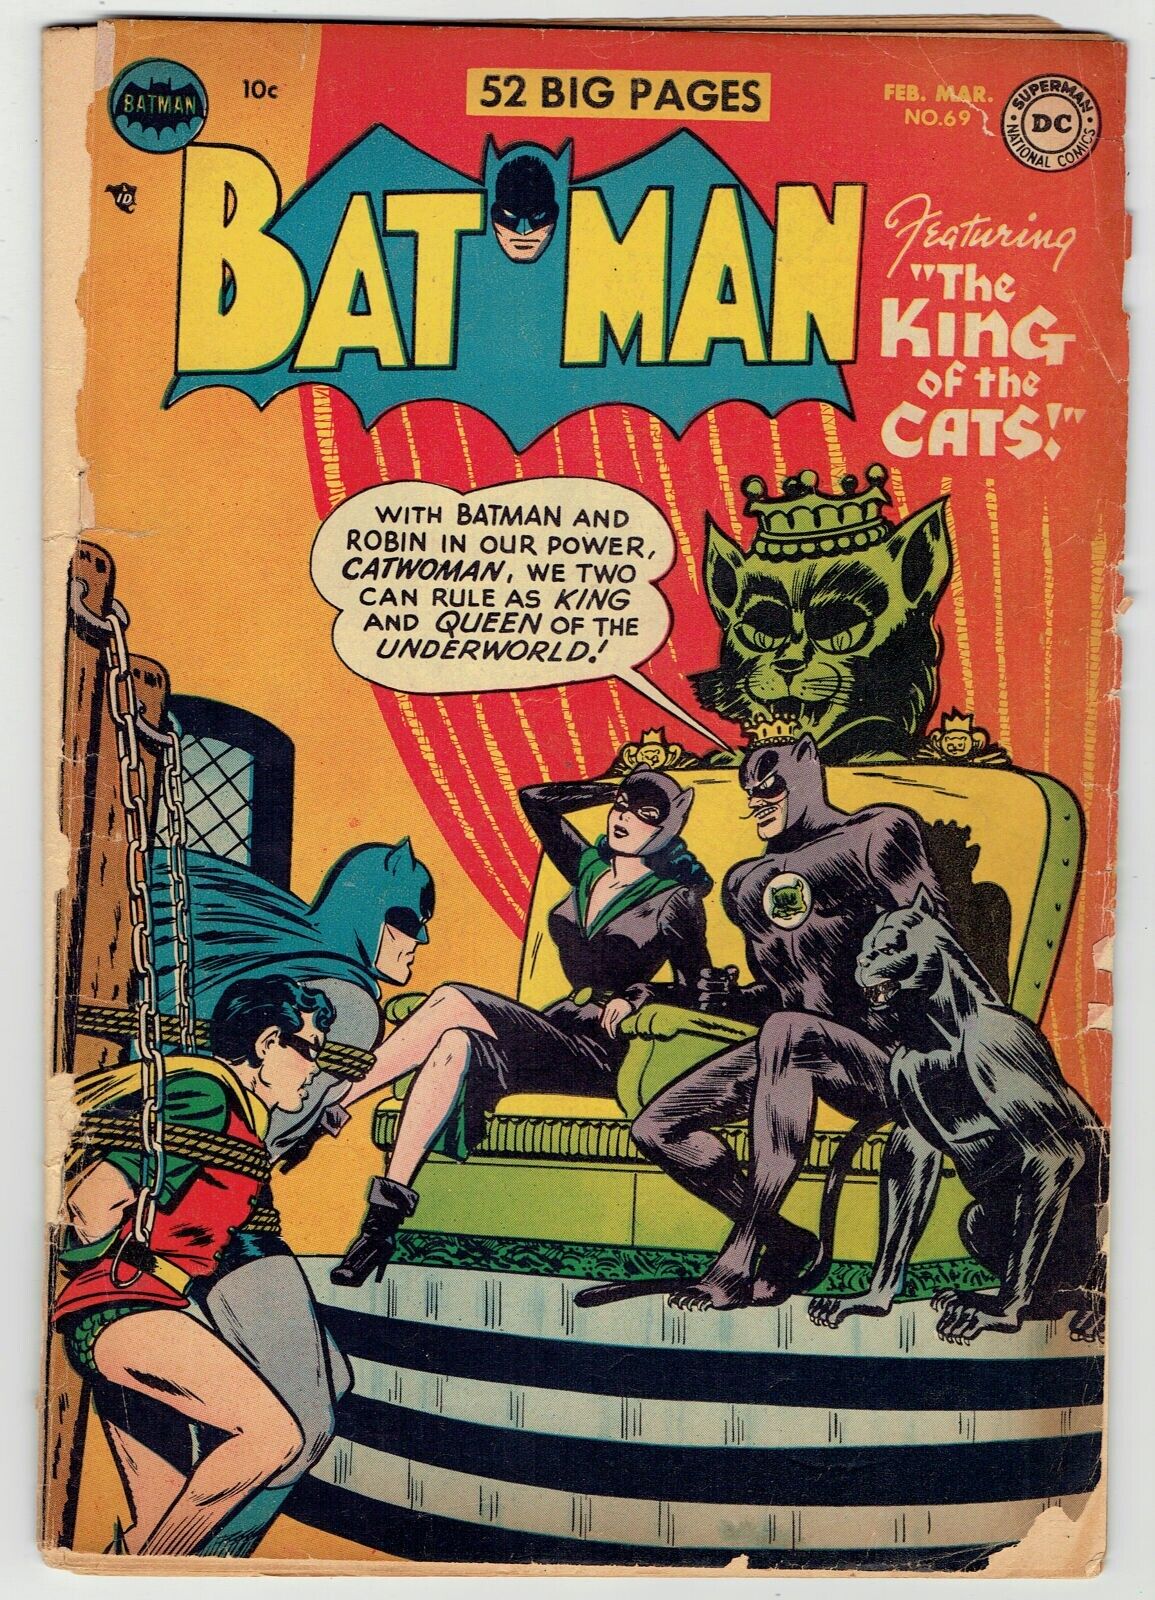 BATMAN #69 (1952) CLASSIC CATWOMAN 1st KING OF CATS COVER DETACHED NO BACK COVER